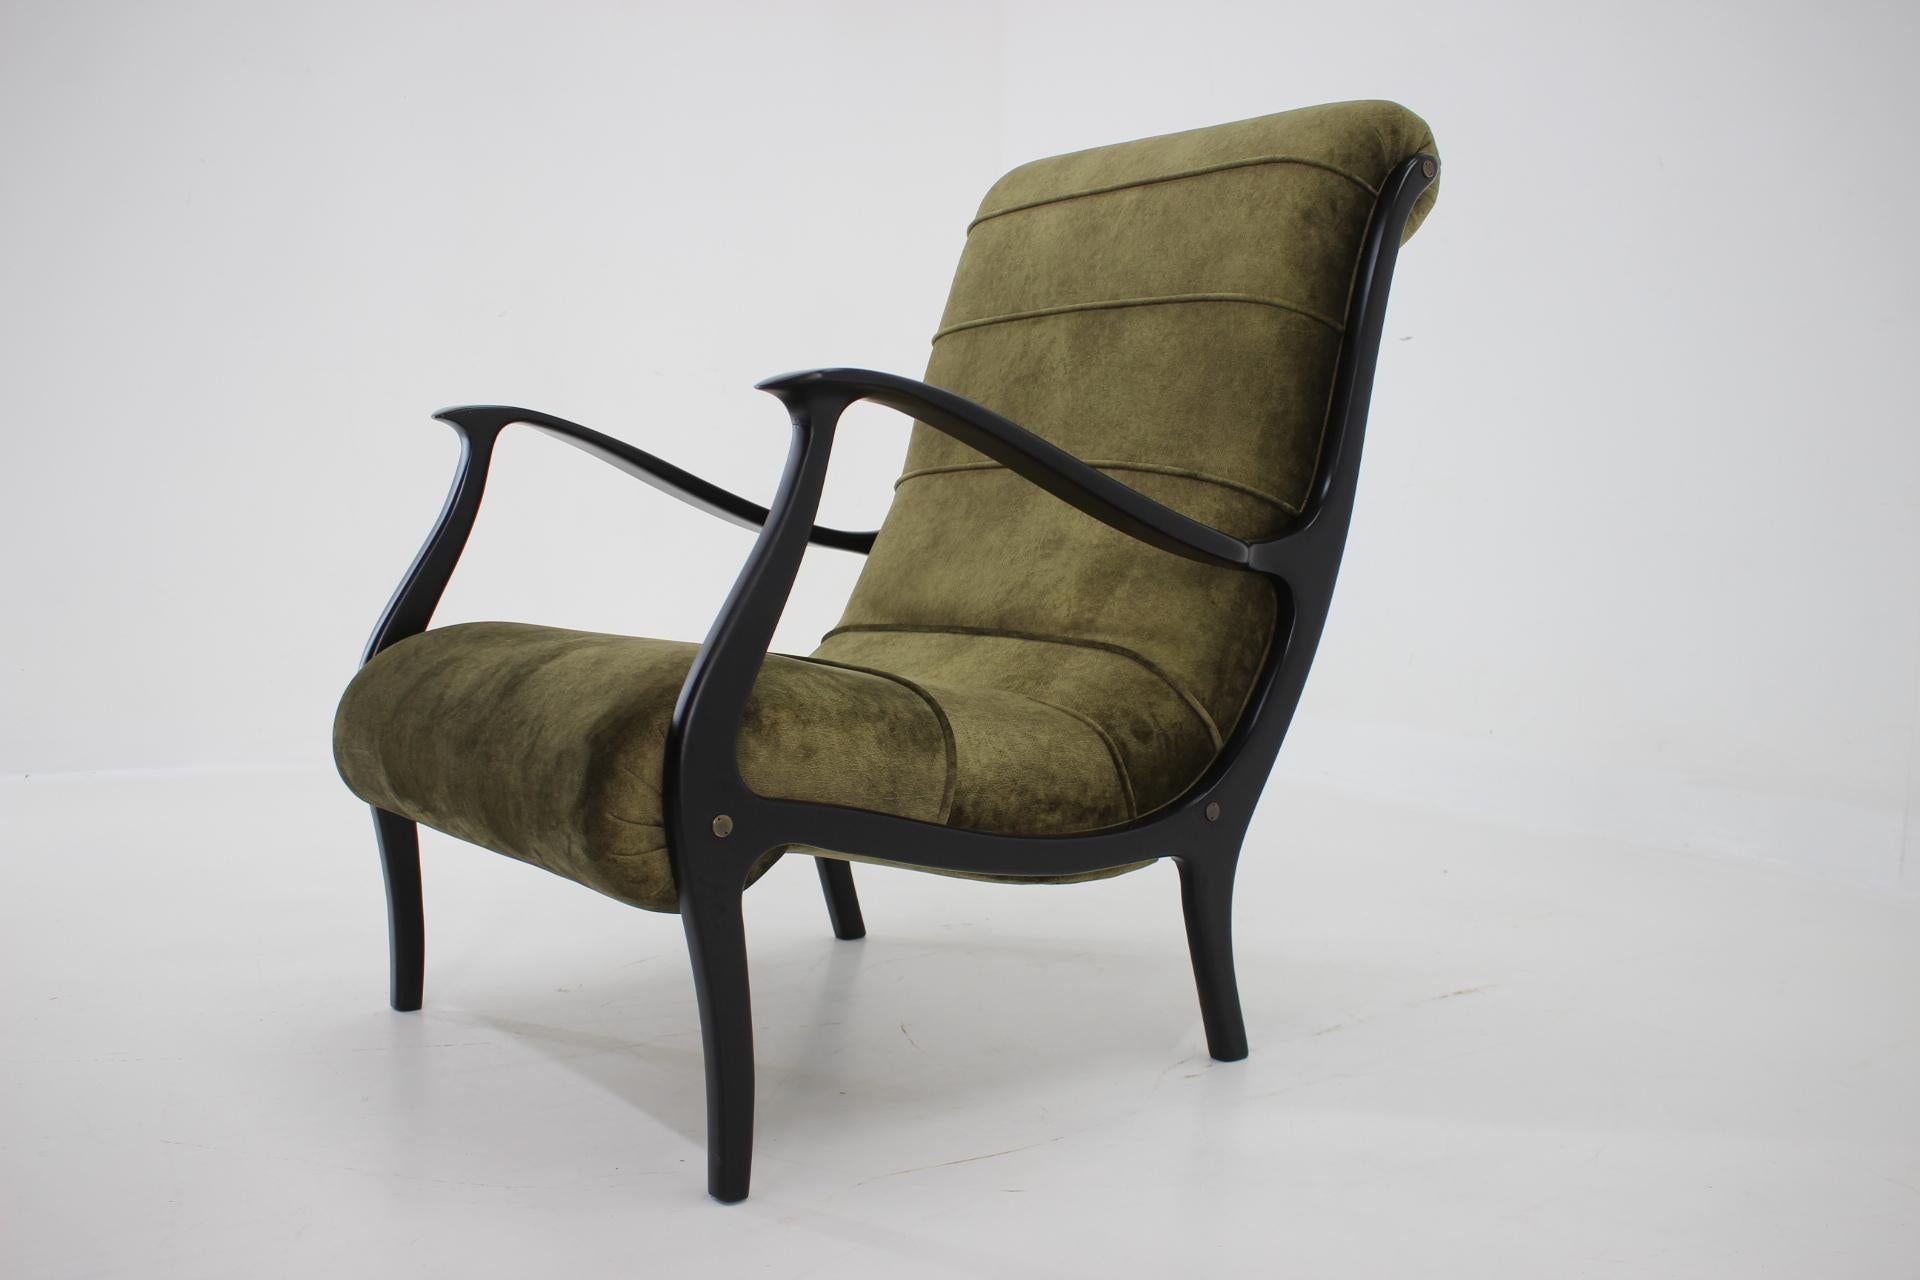 Beautiful bentwood armchair by Ezio Longhi, made in Italy in the 1950s. Compleately renovated, newly upholstered in velvet fabric with easy clean technology.